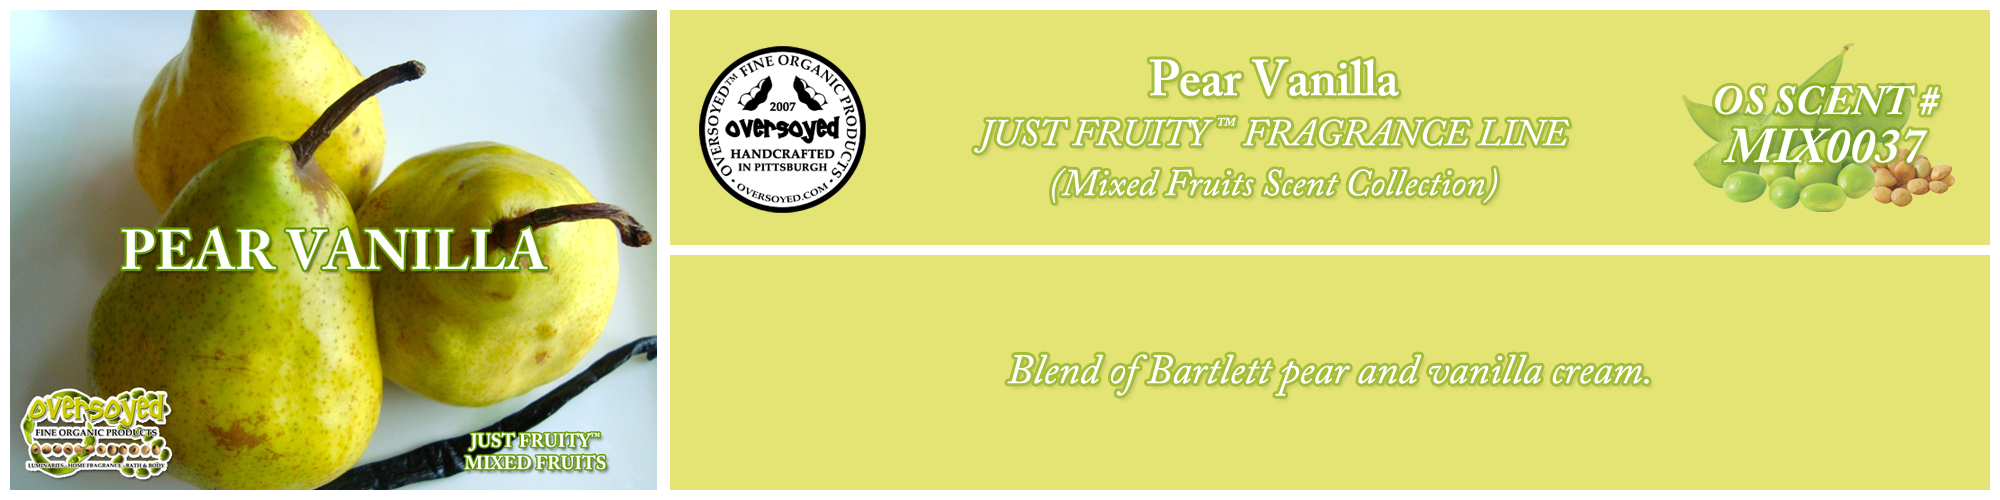 Pear Vanilla Handcrafted Products Collection